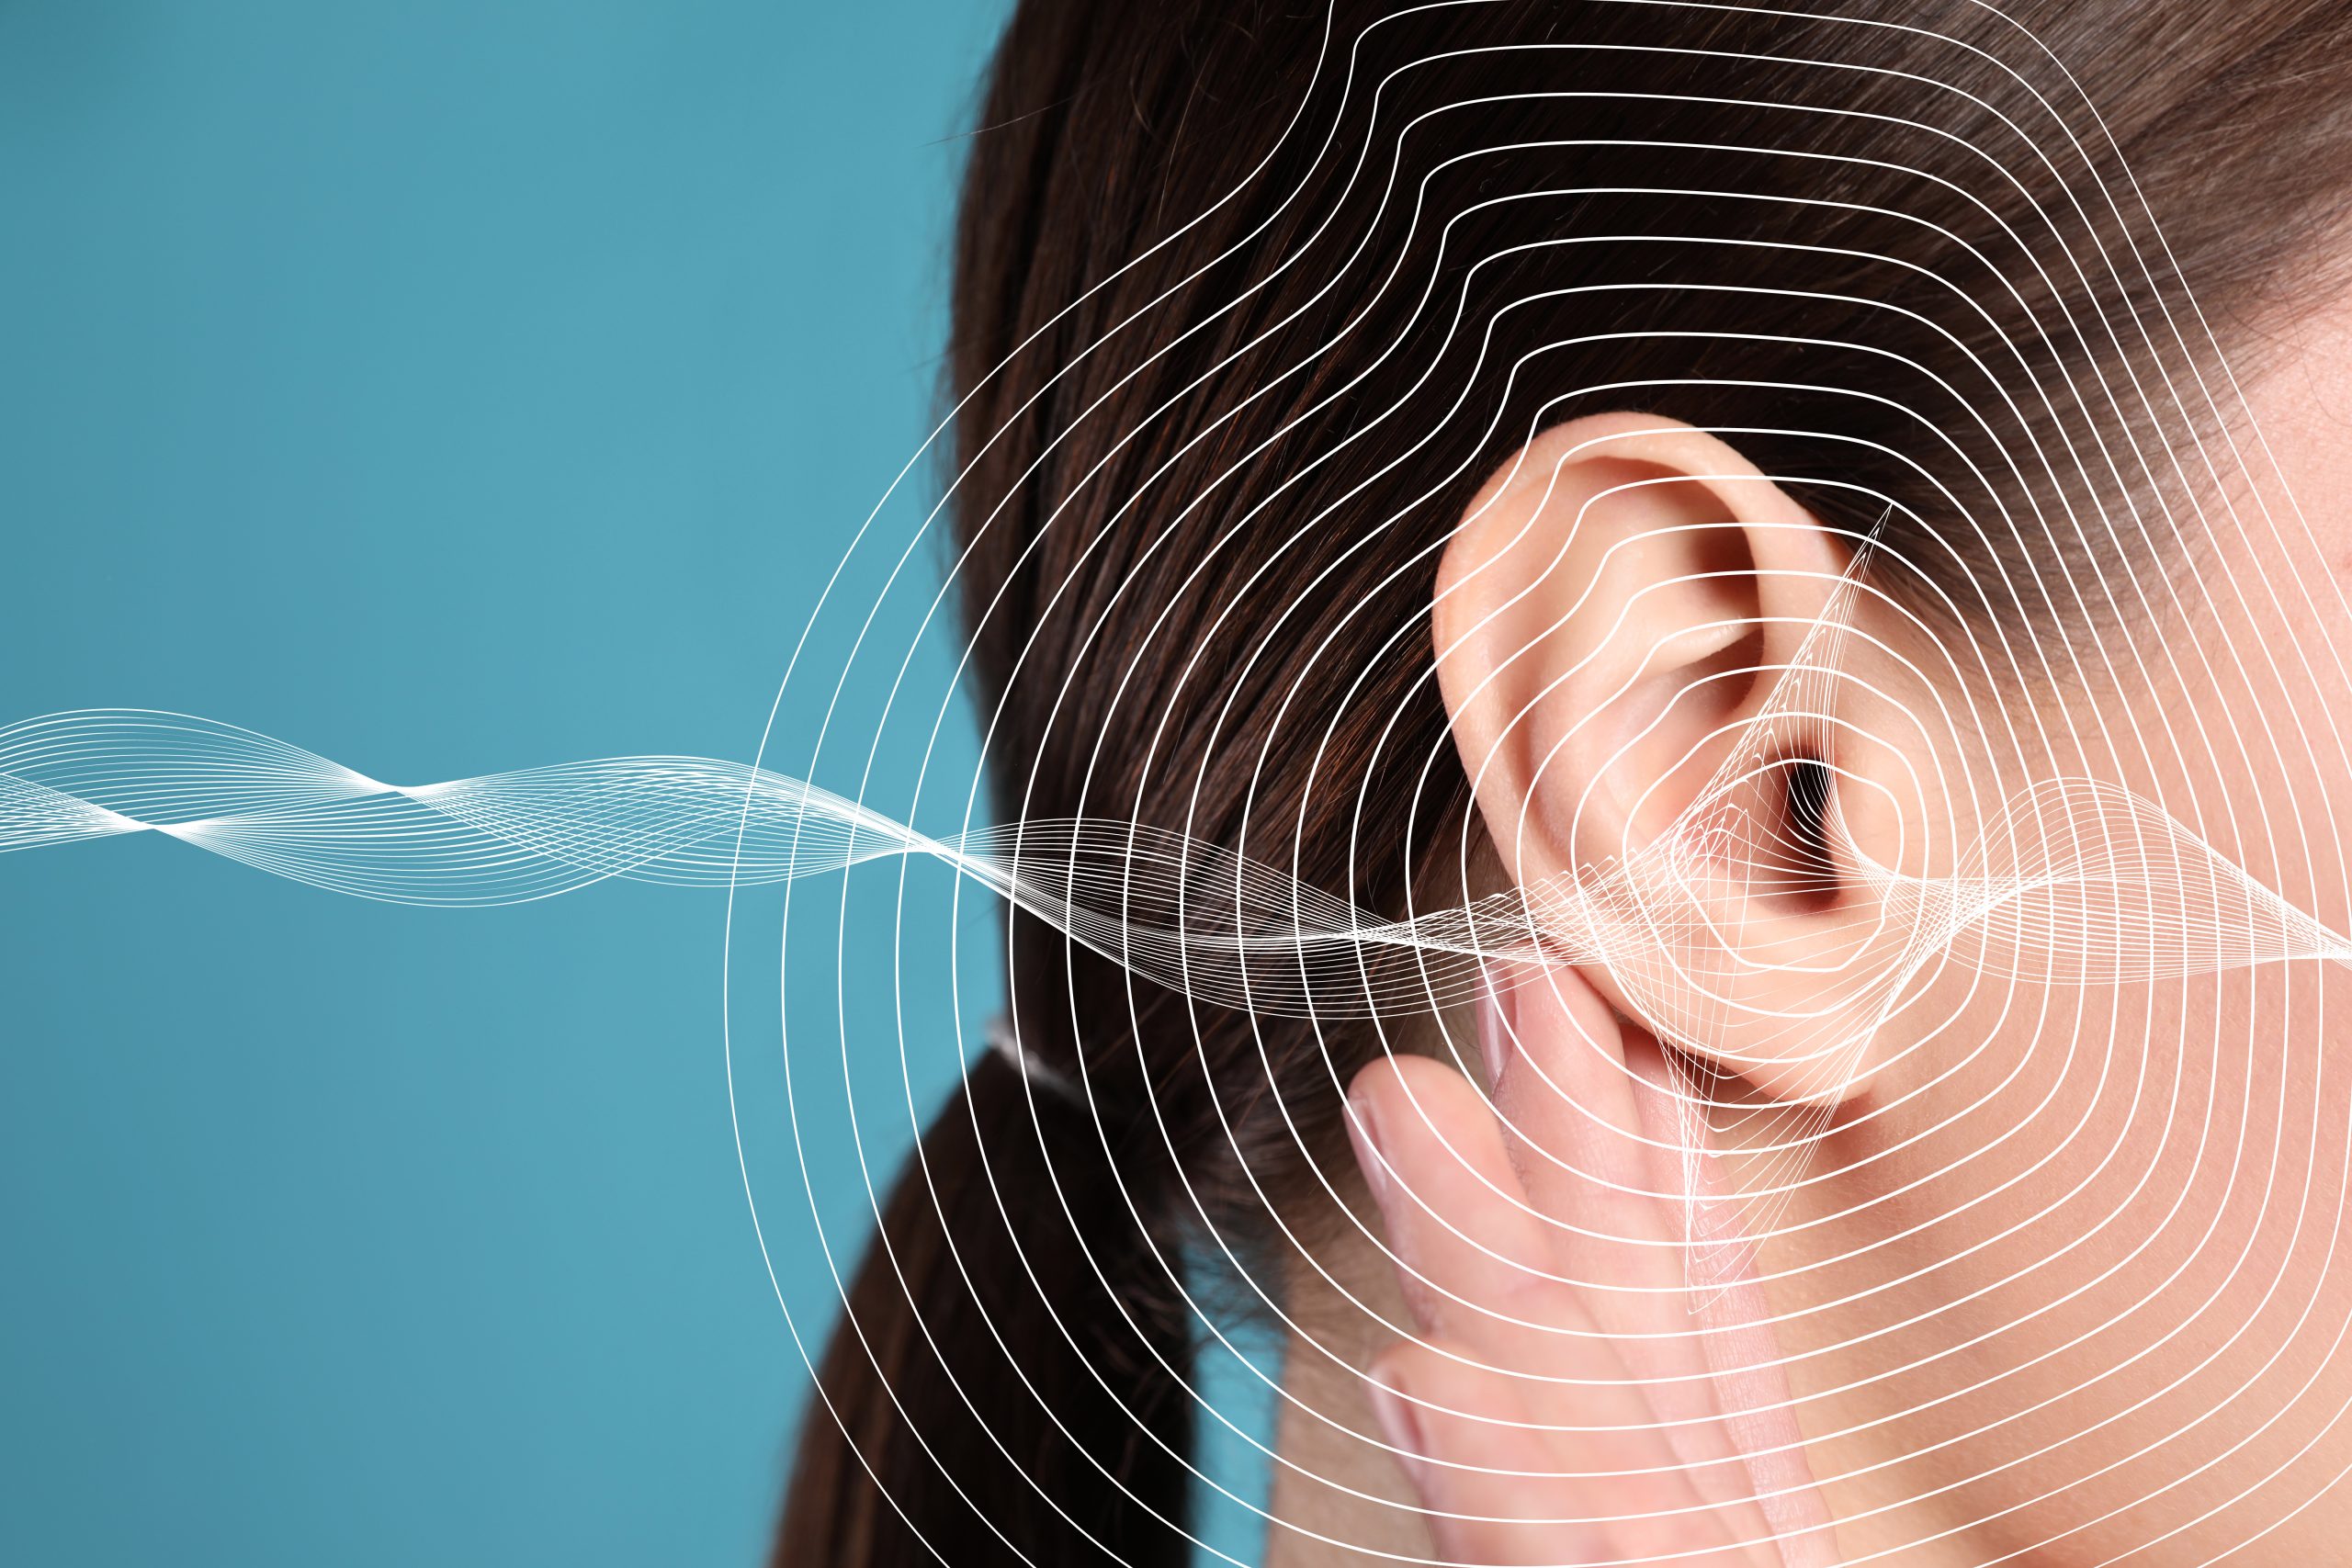 How accurate are hearing tests?